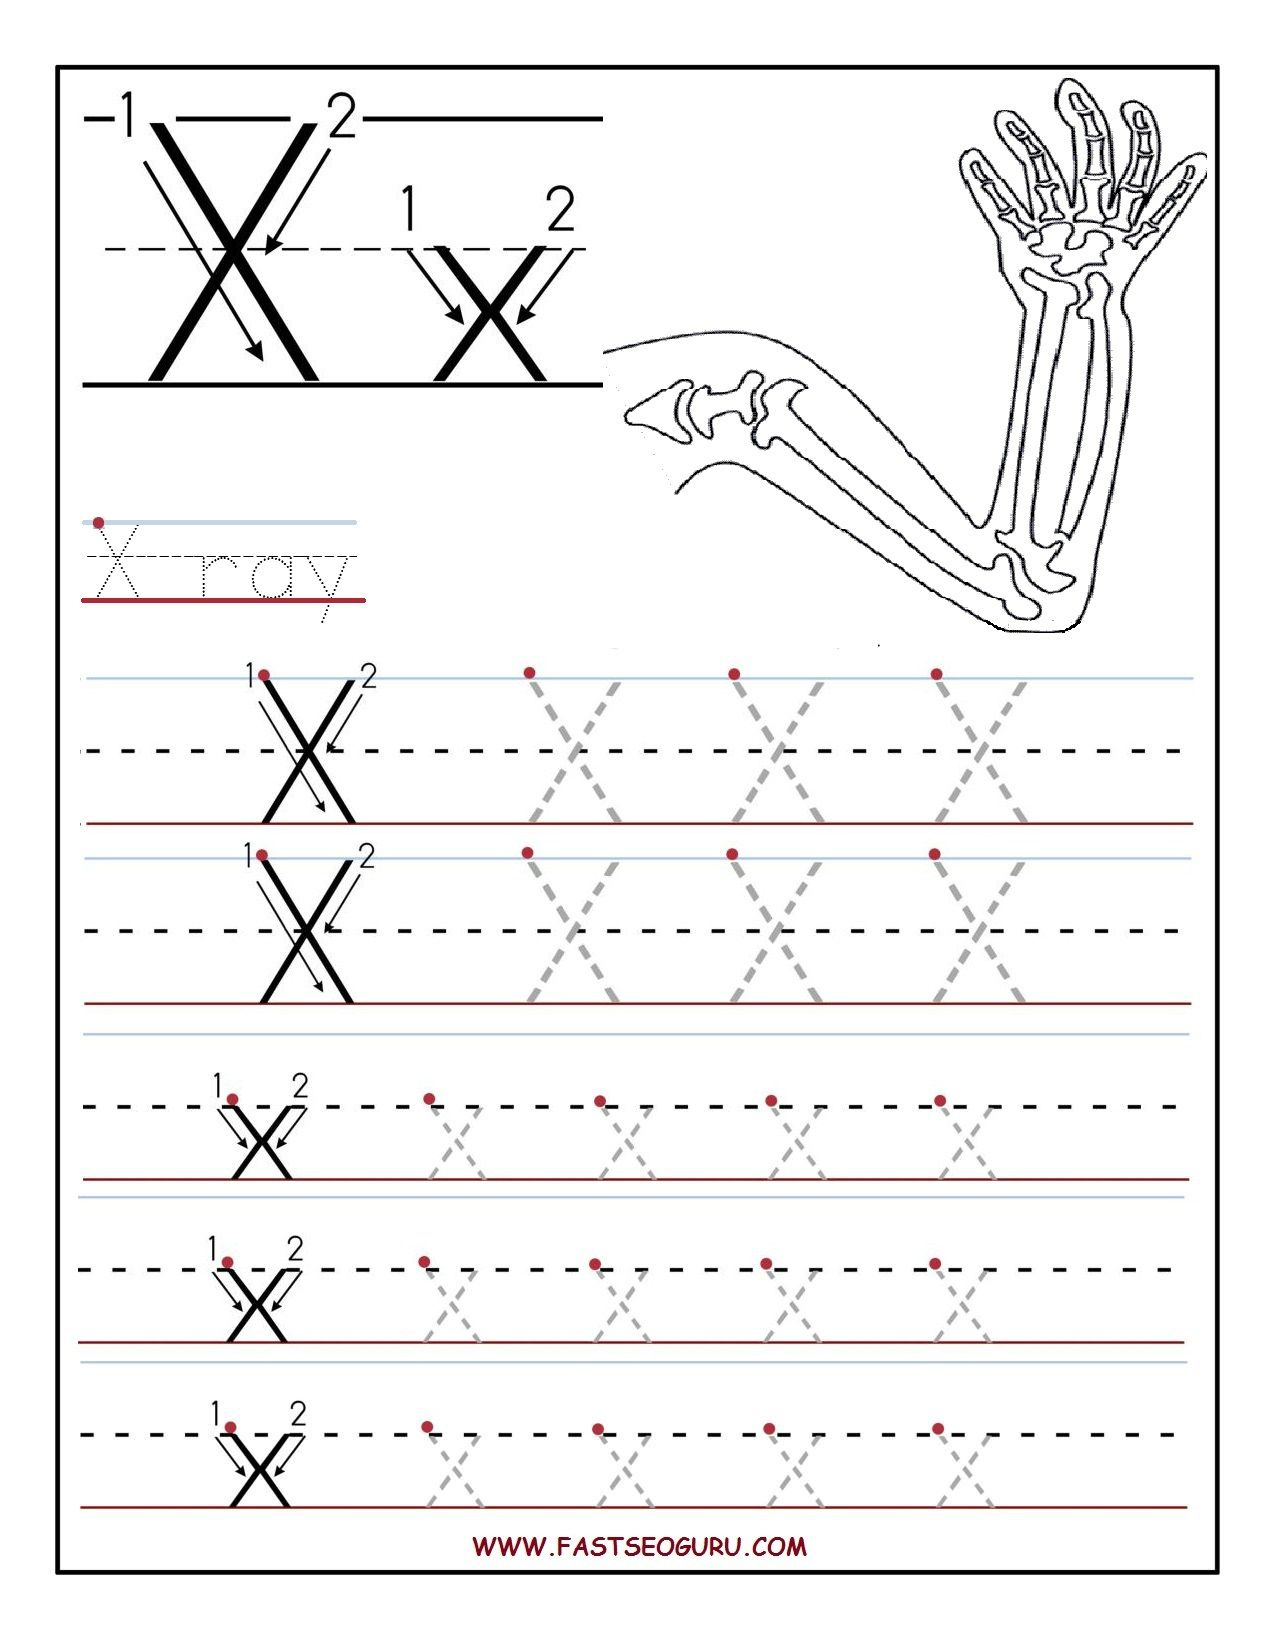 Printable Letter X Tracing Worksheets For Preschool with X Letter Tracing